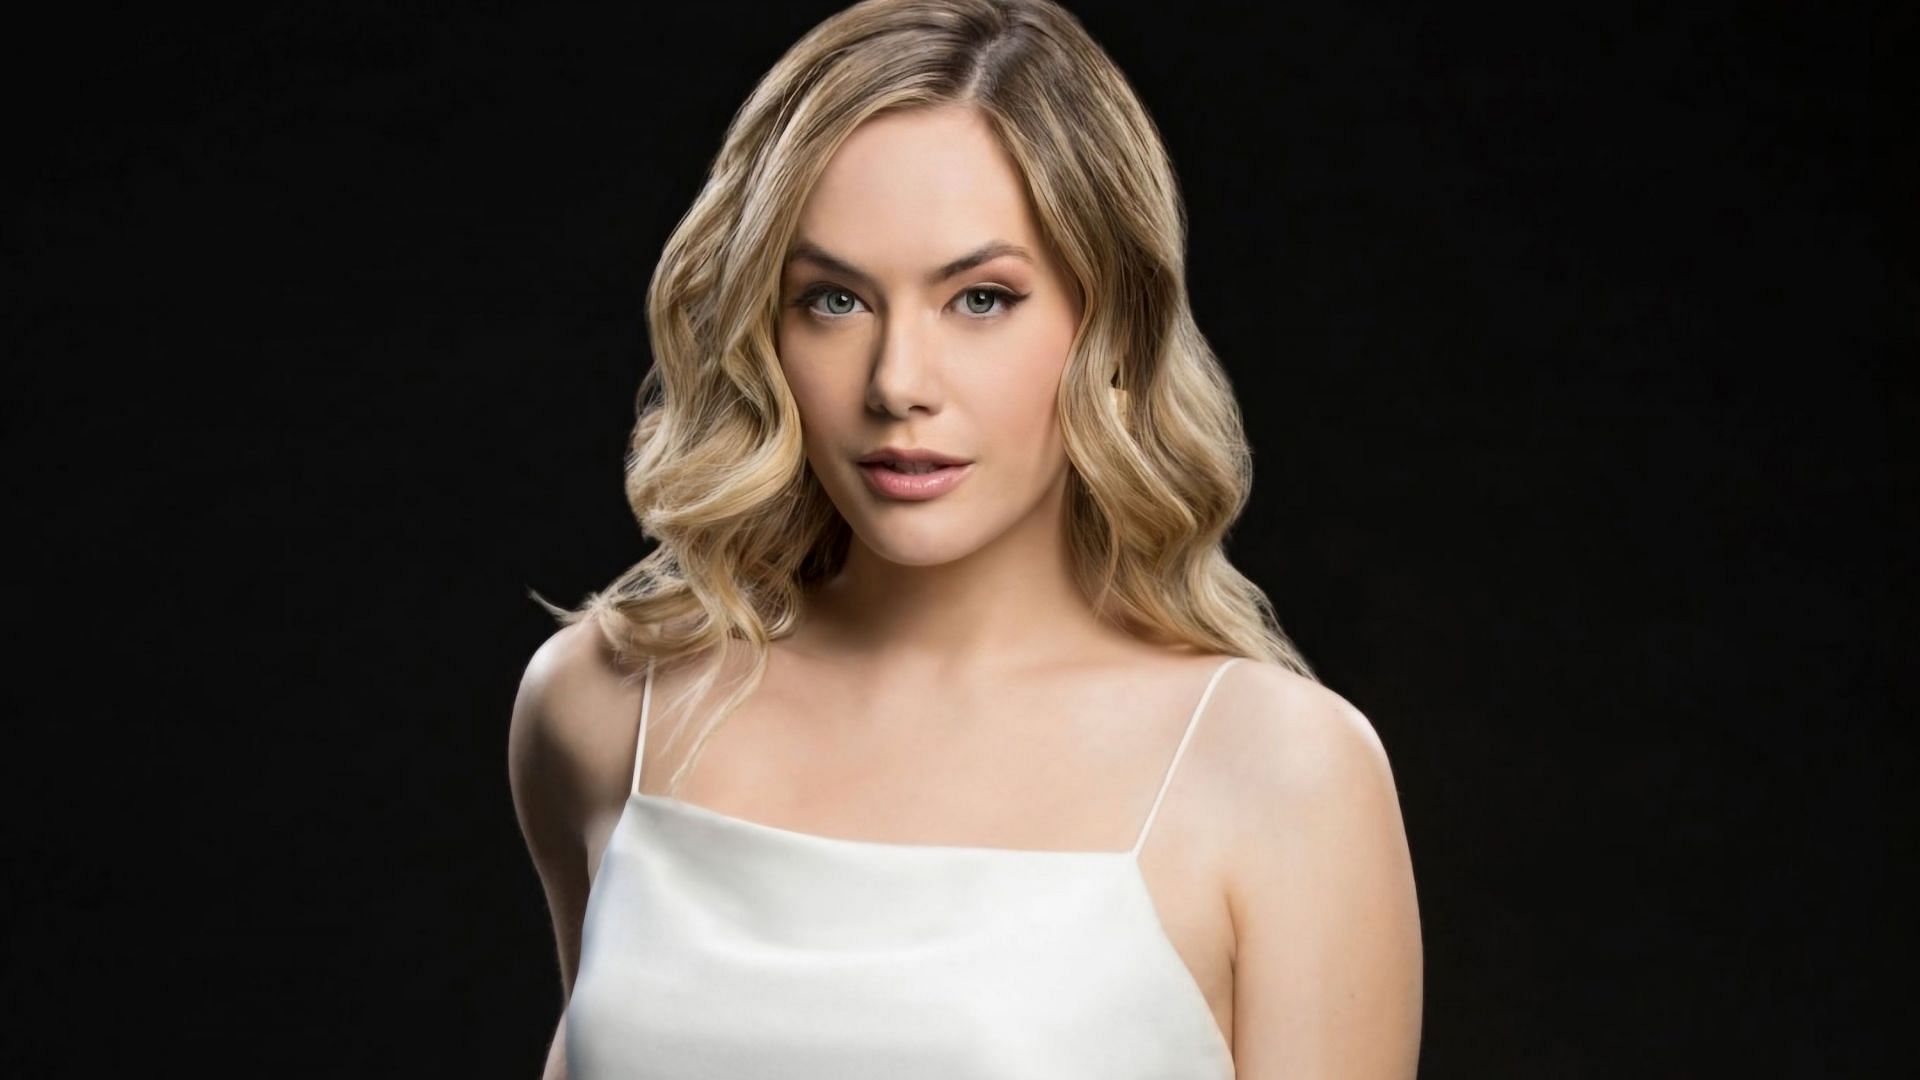 Annika Noelle as Hope Logan on The Bold and the Beautiful (via CBS Photo Archive)